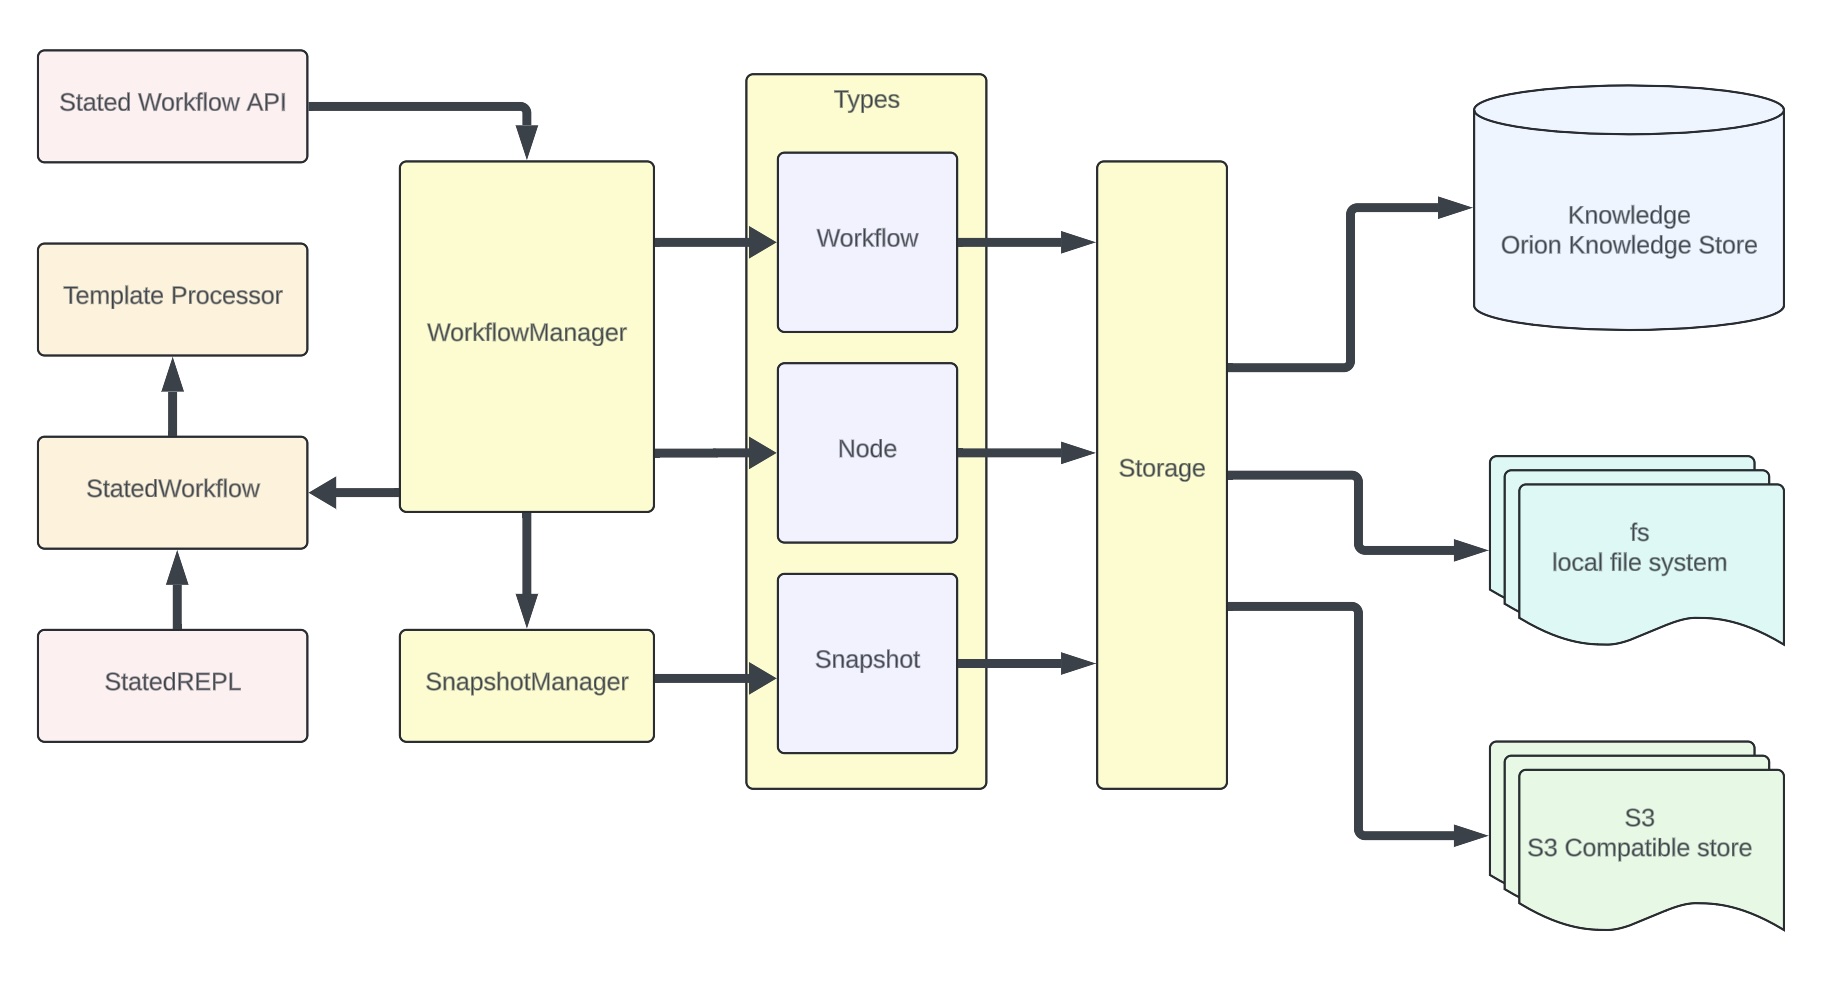 Stated Workflow Components